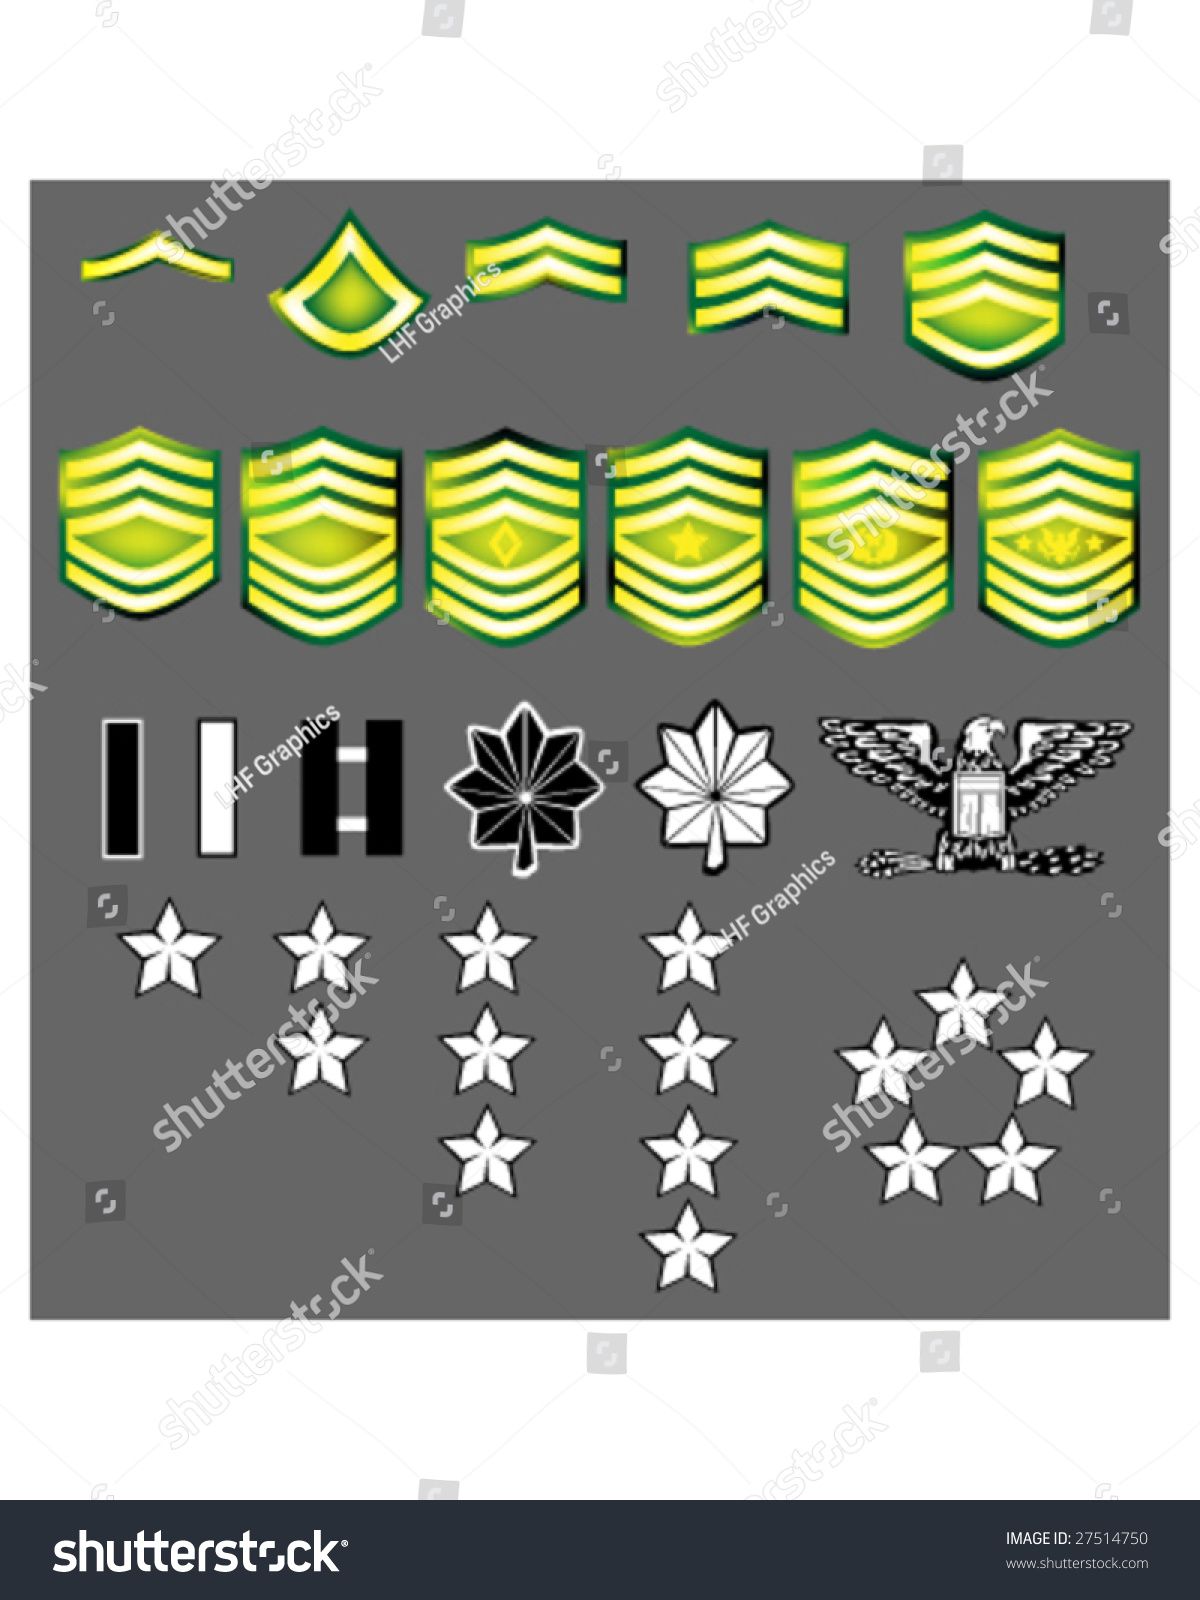 Us Army Rank Insignia Officers Enlisted Stock Vector 27514750 ...